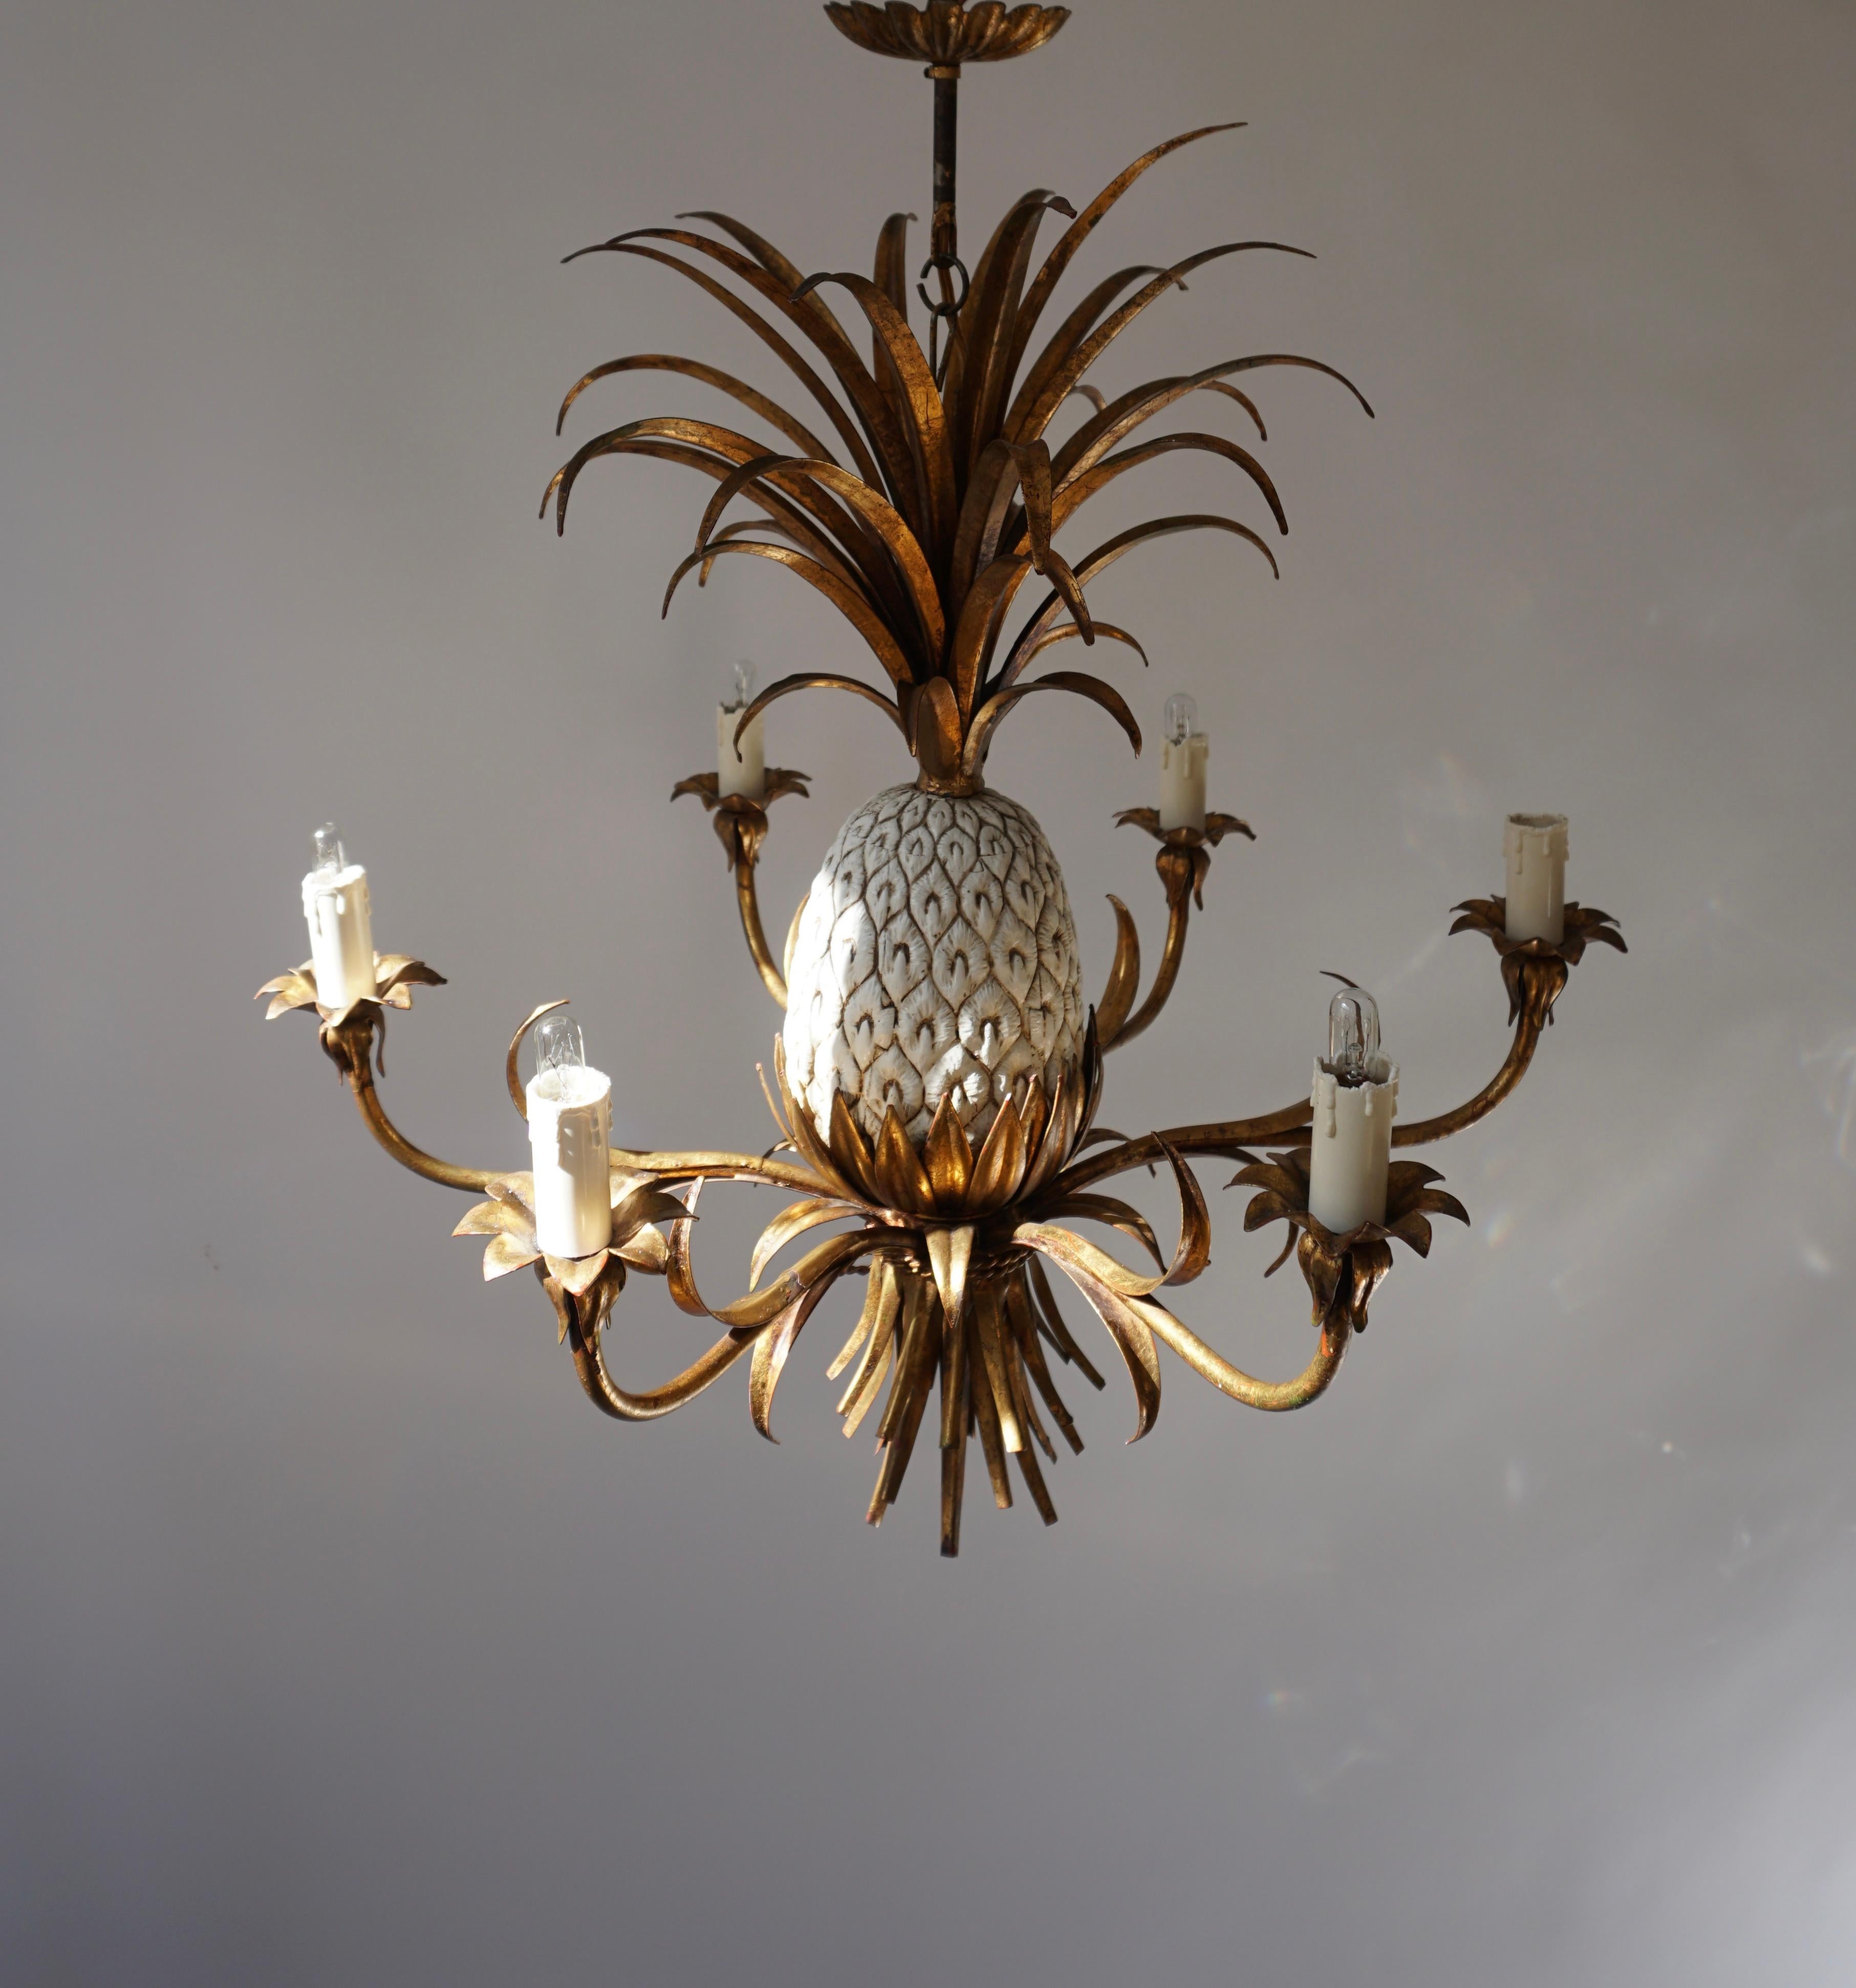 20th Century Italian Ceramic and Brass Pineapple Chandelier, circa 1970s For Sale